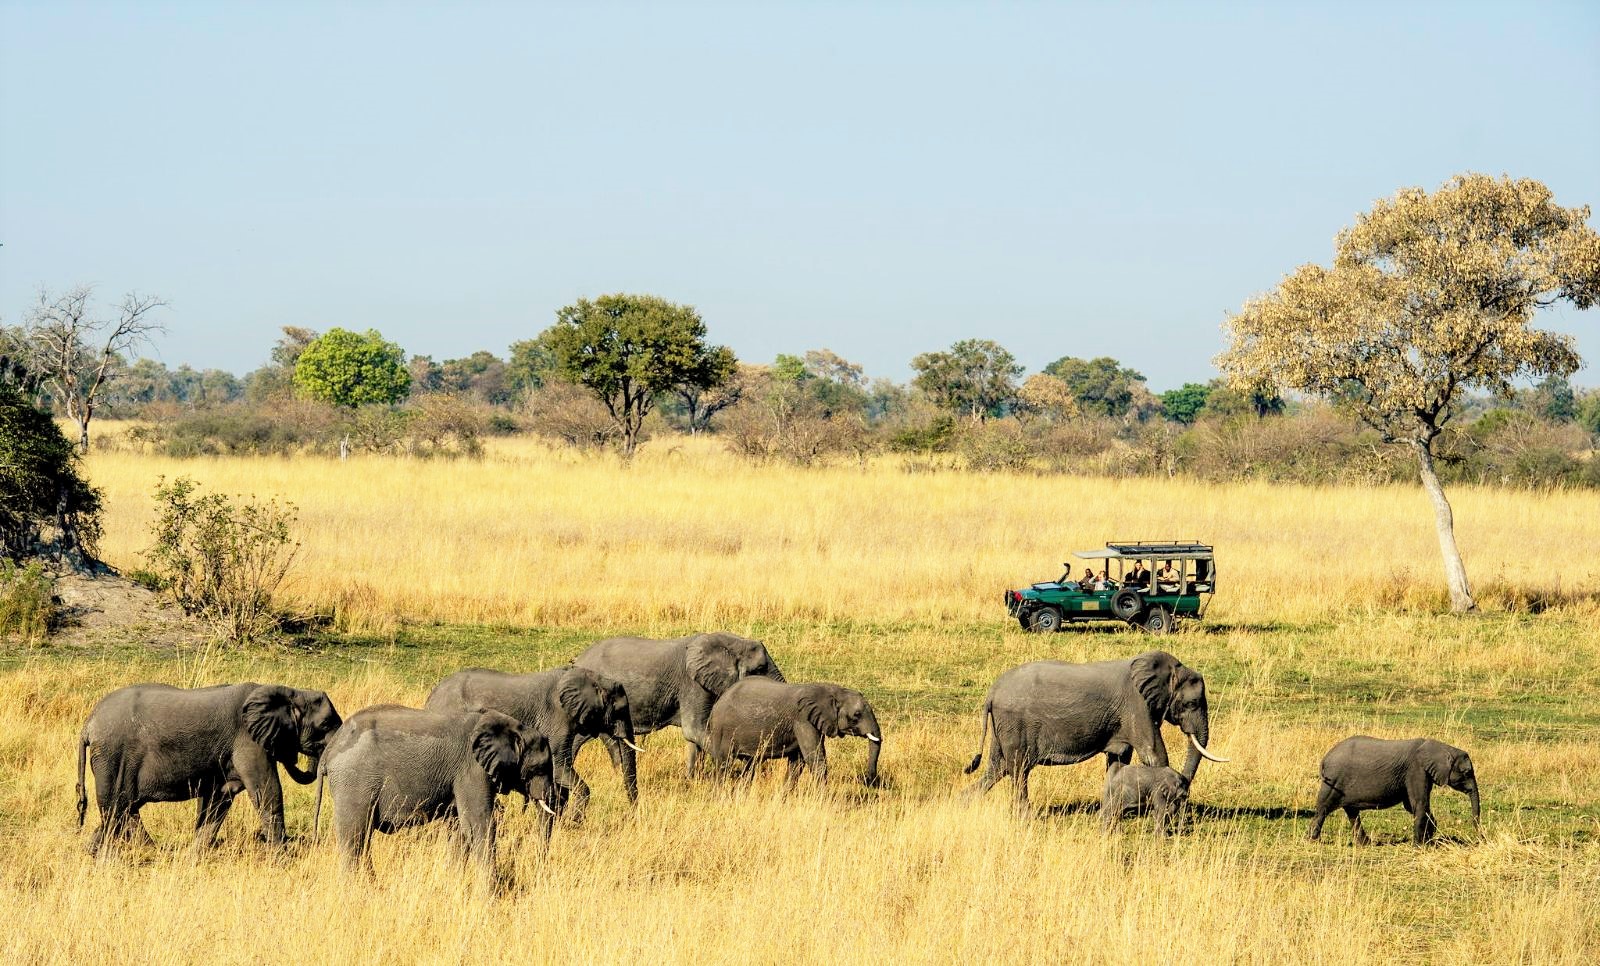 Game drive in search of elephants at Duke's Camp on the Okavango Delta in Botswana